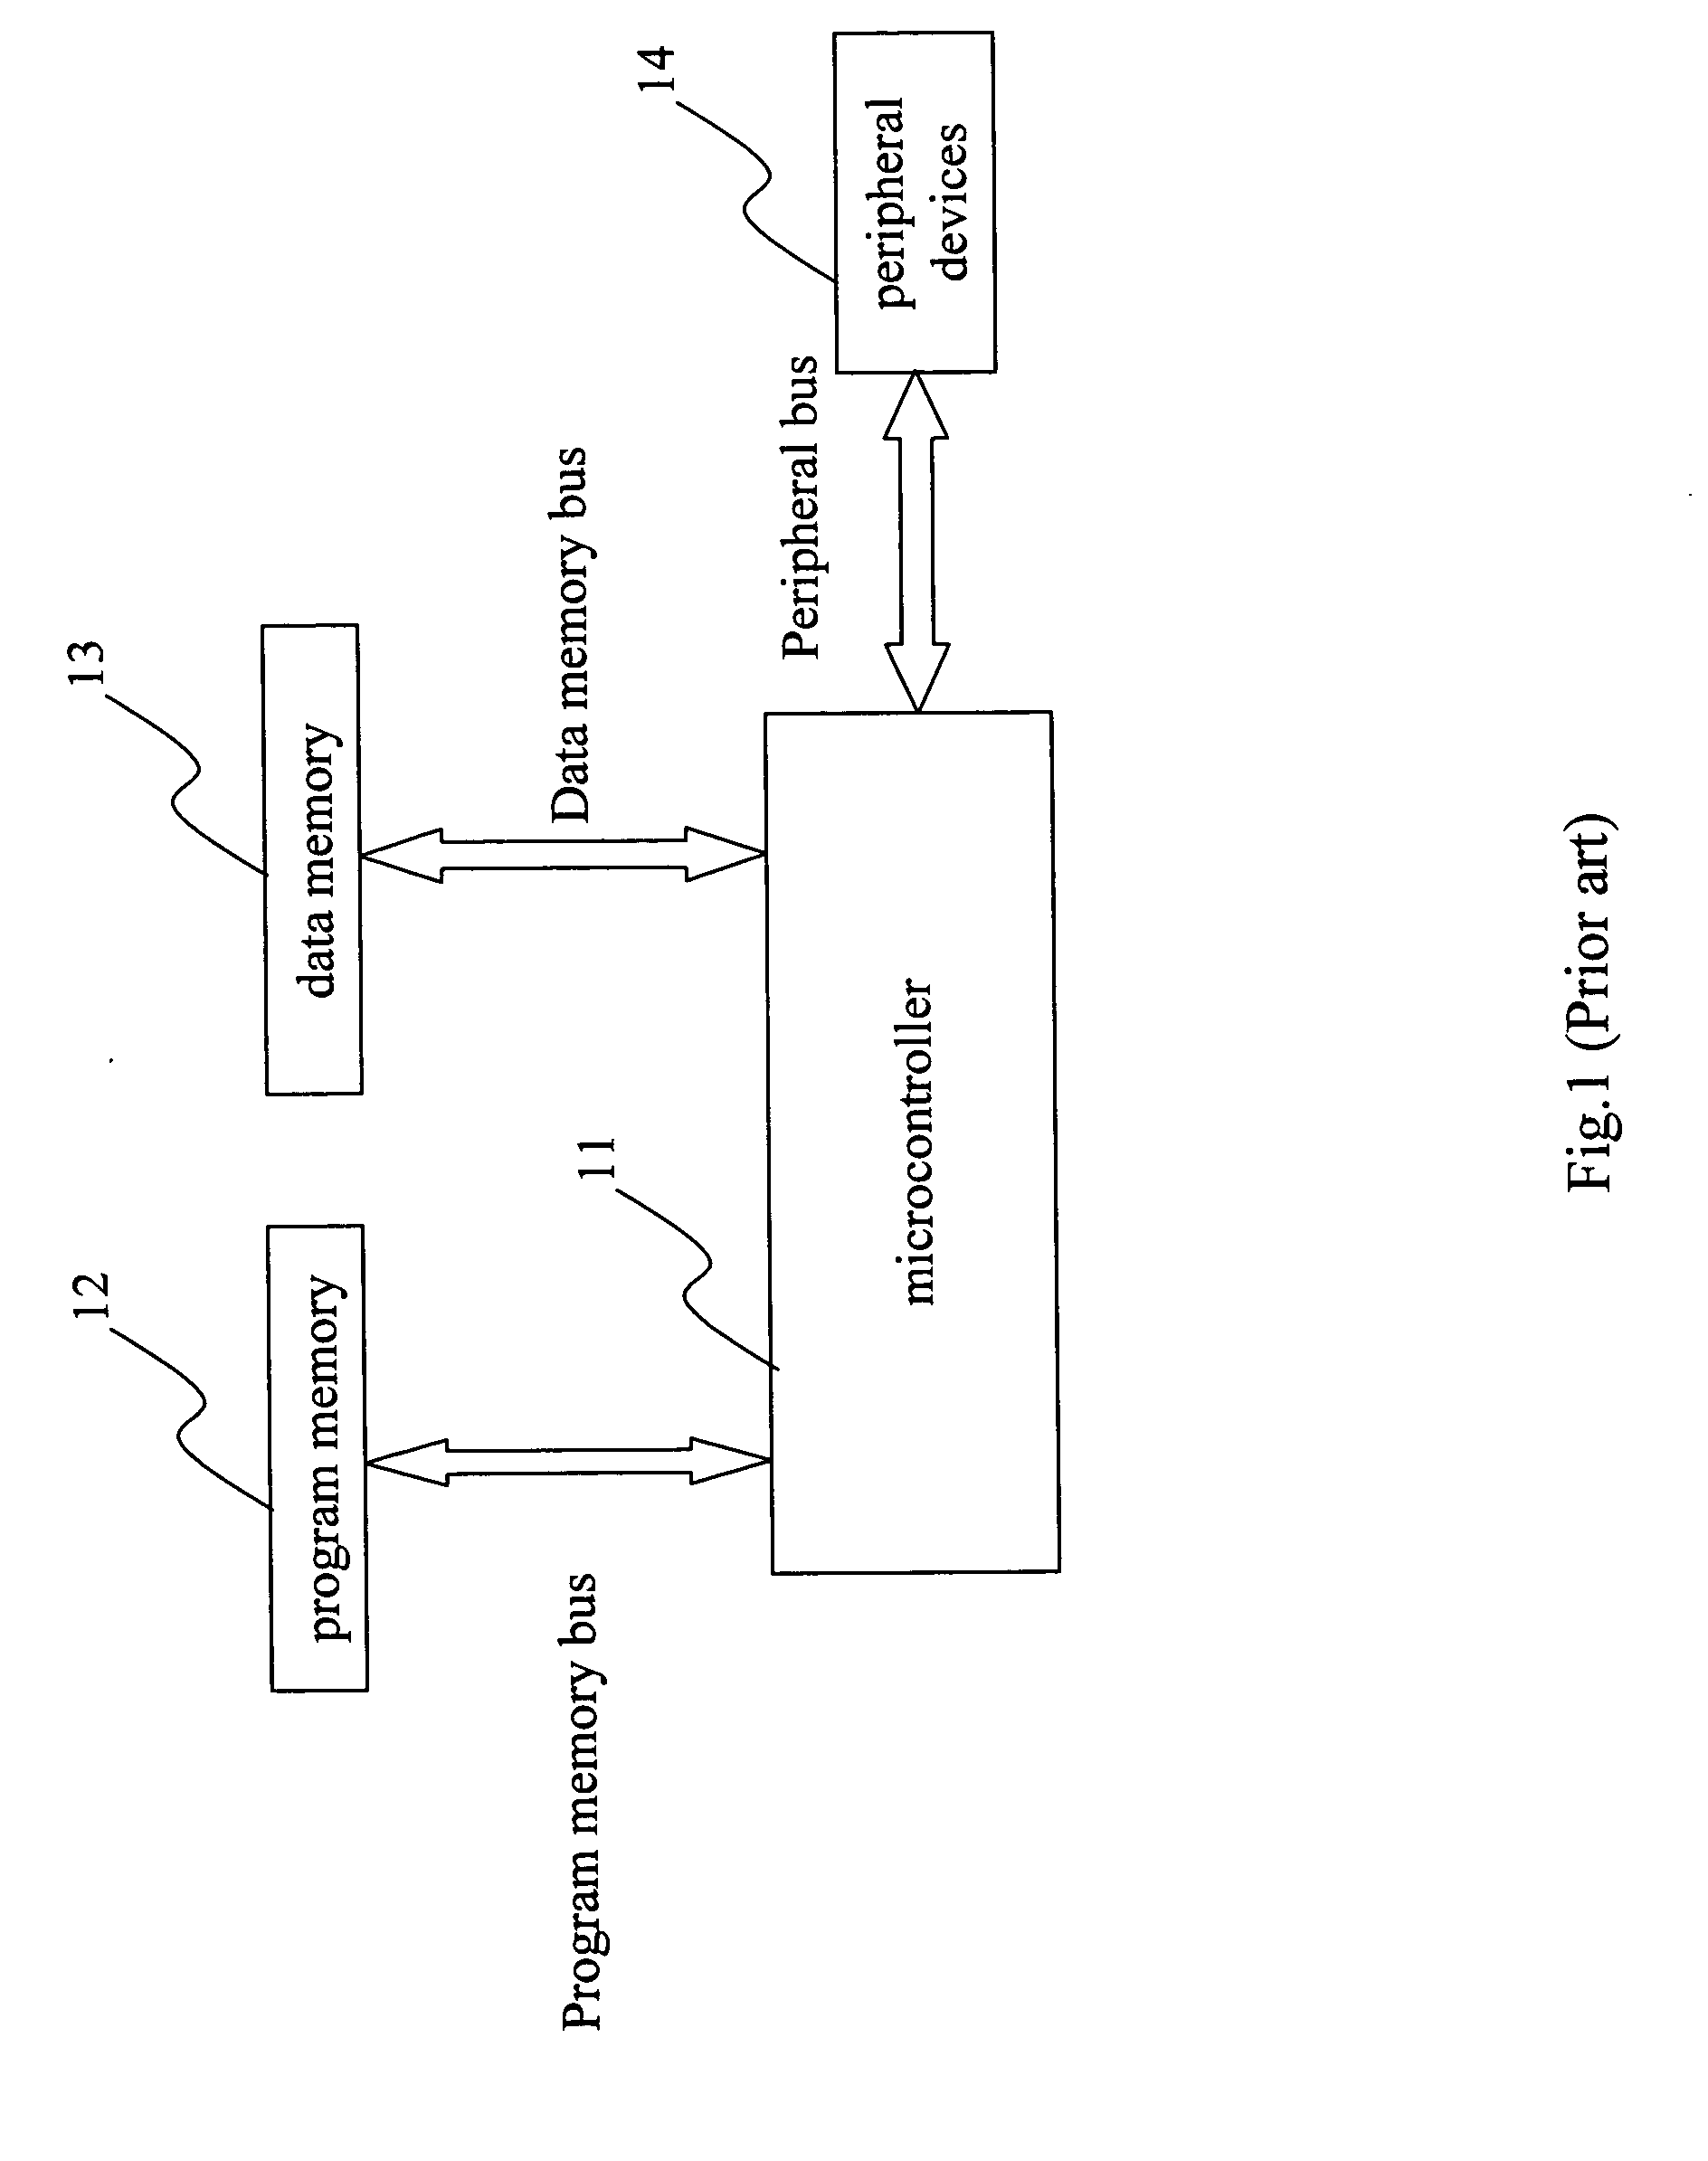 Architecture of a parallel-processing multi-microcontroller system and timing control method thereof